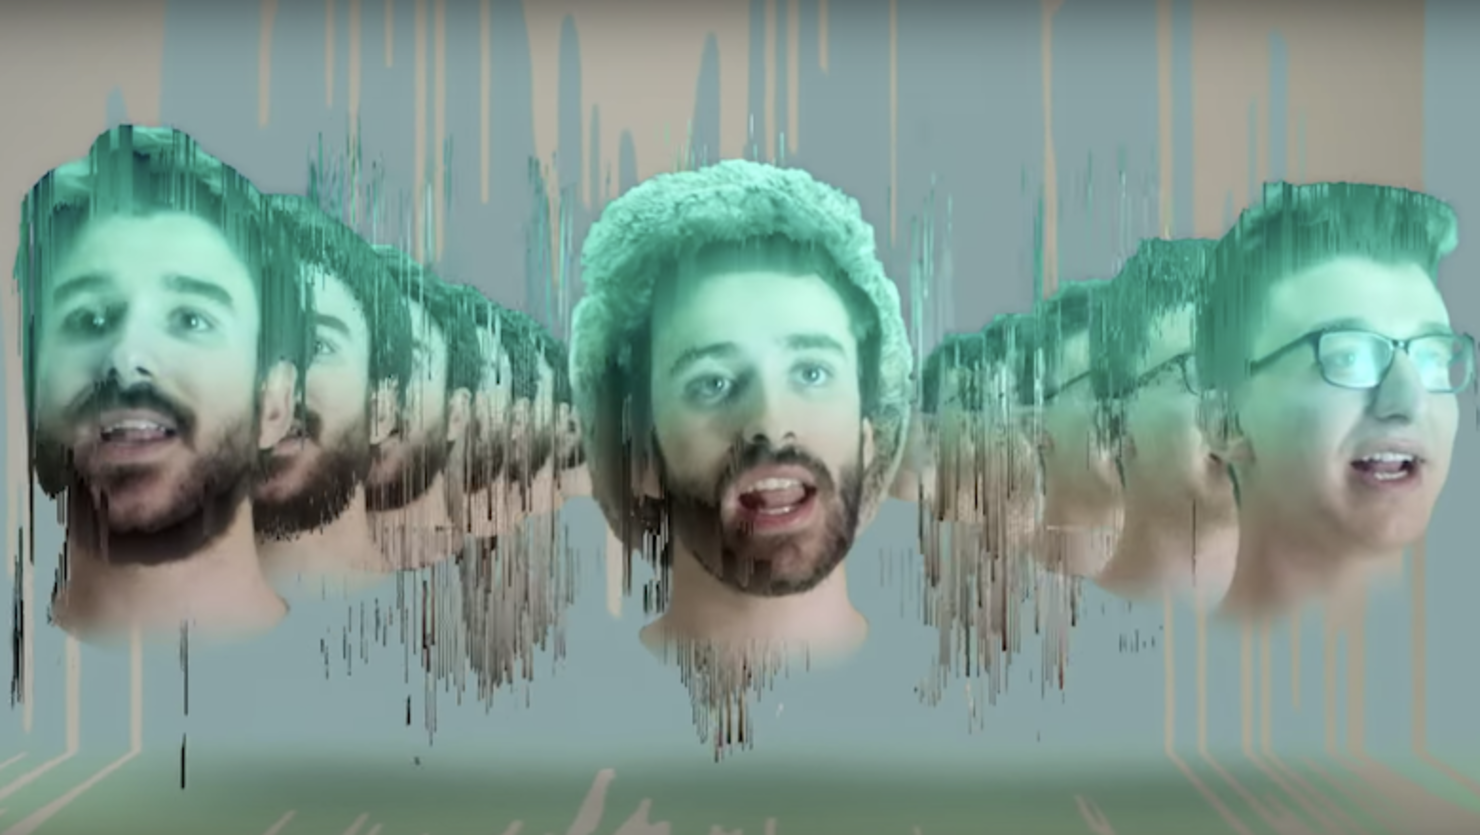 some recent art i did for the 100 bad days music video : r/AJR